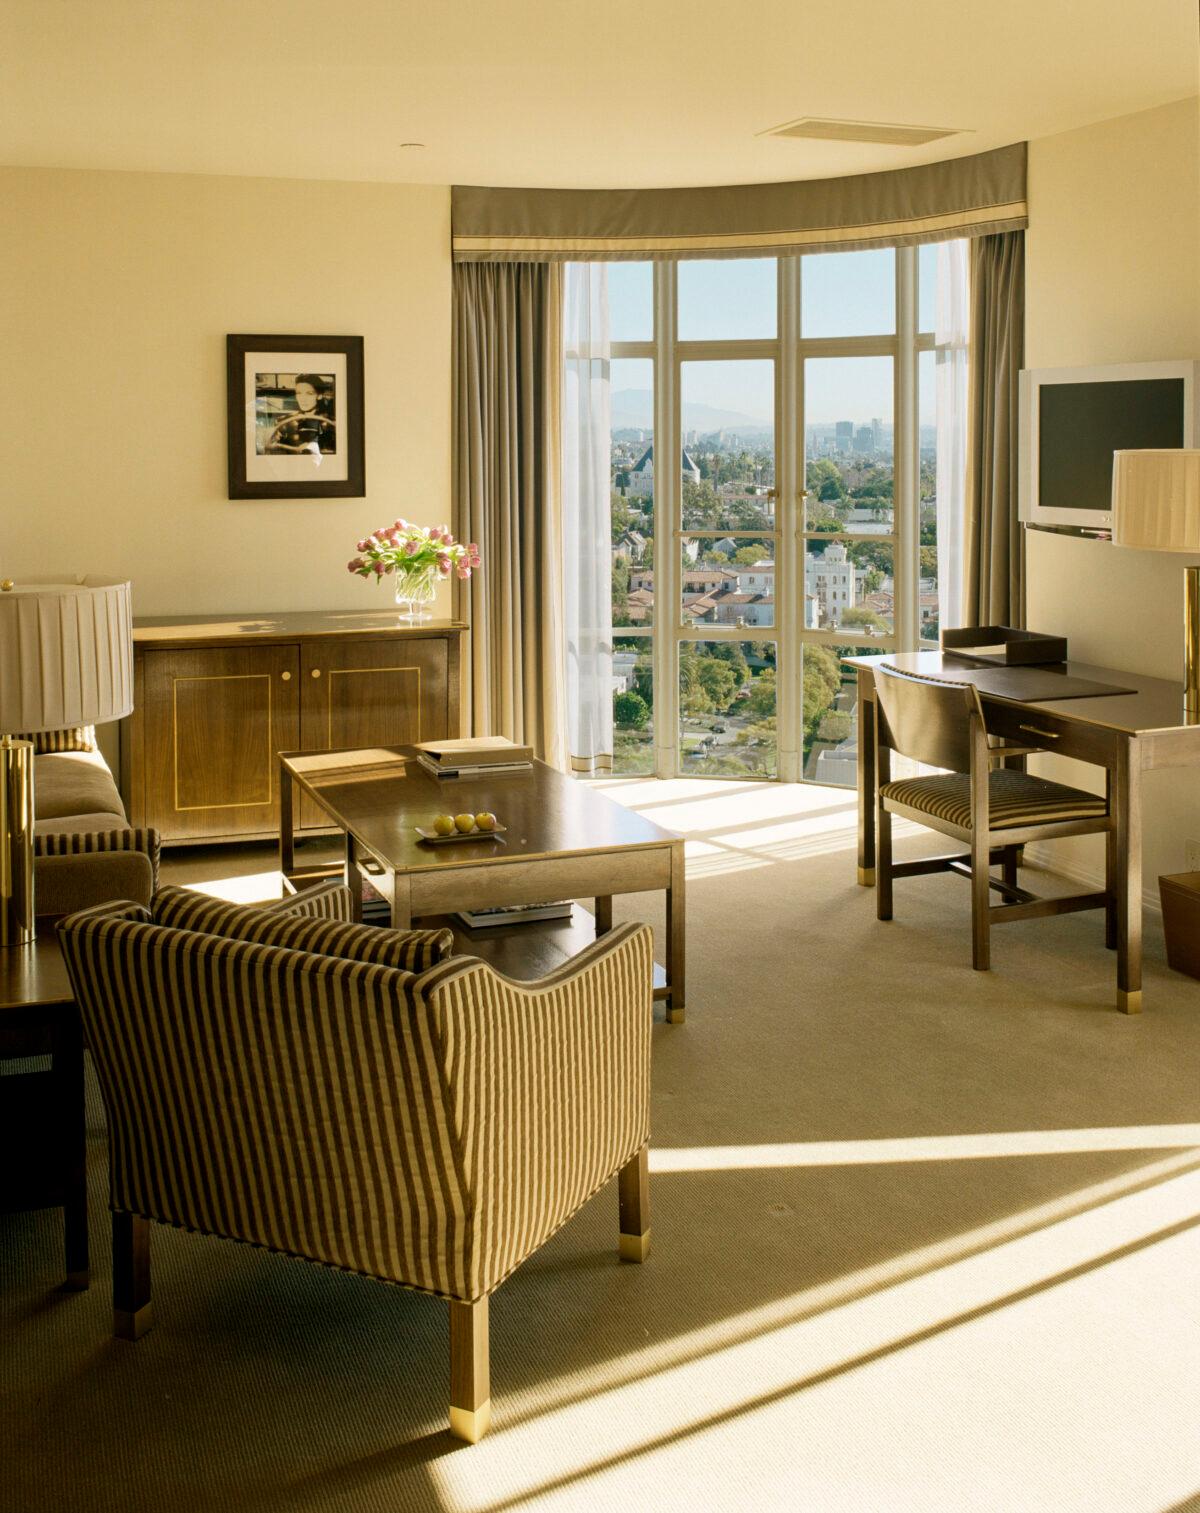 Premiere suite at Sunset Tower Hotel. (Courtesy of Sunset Tower Hotel)